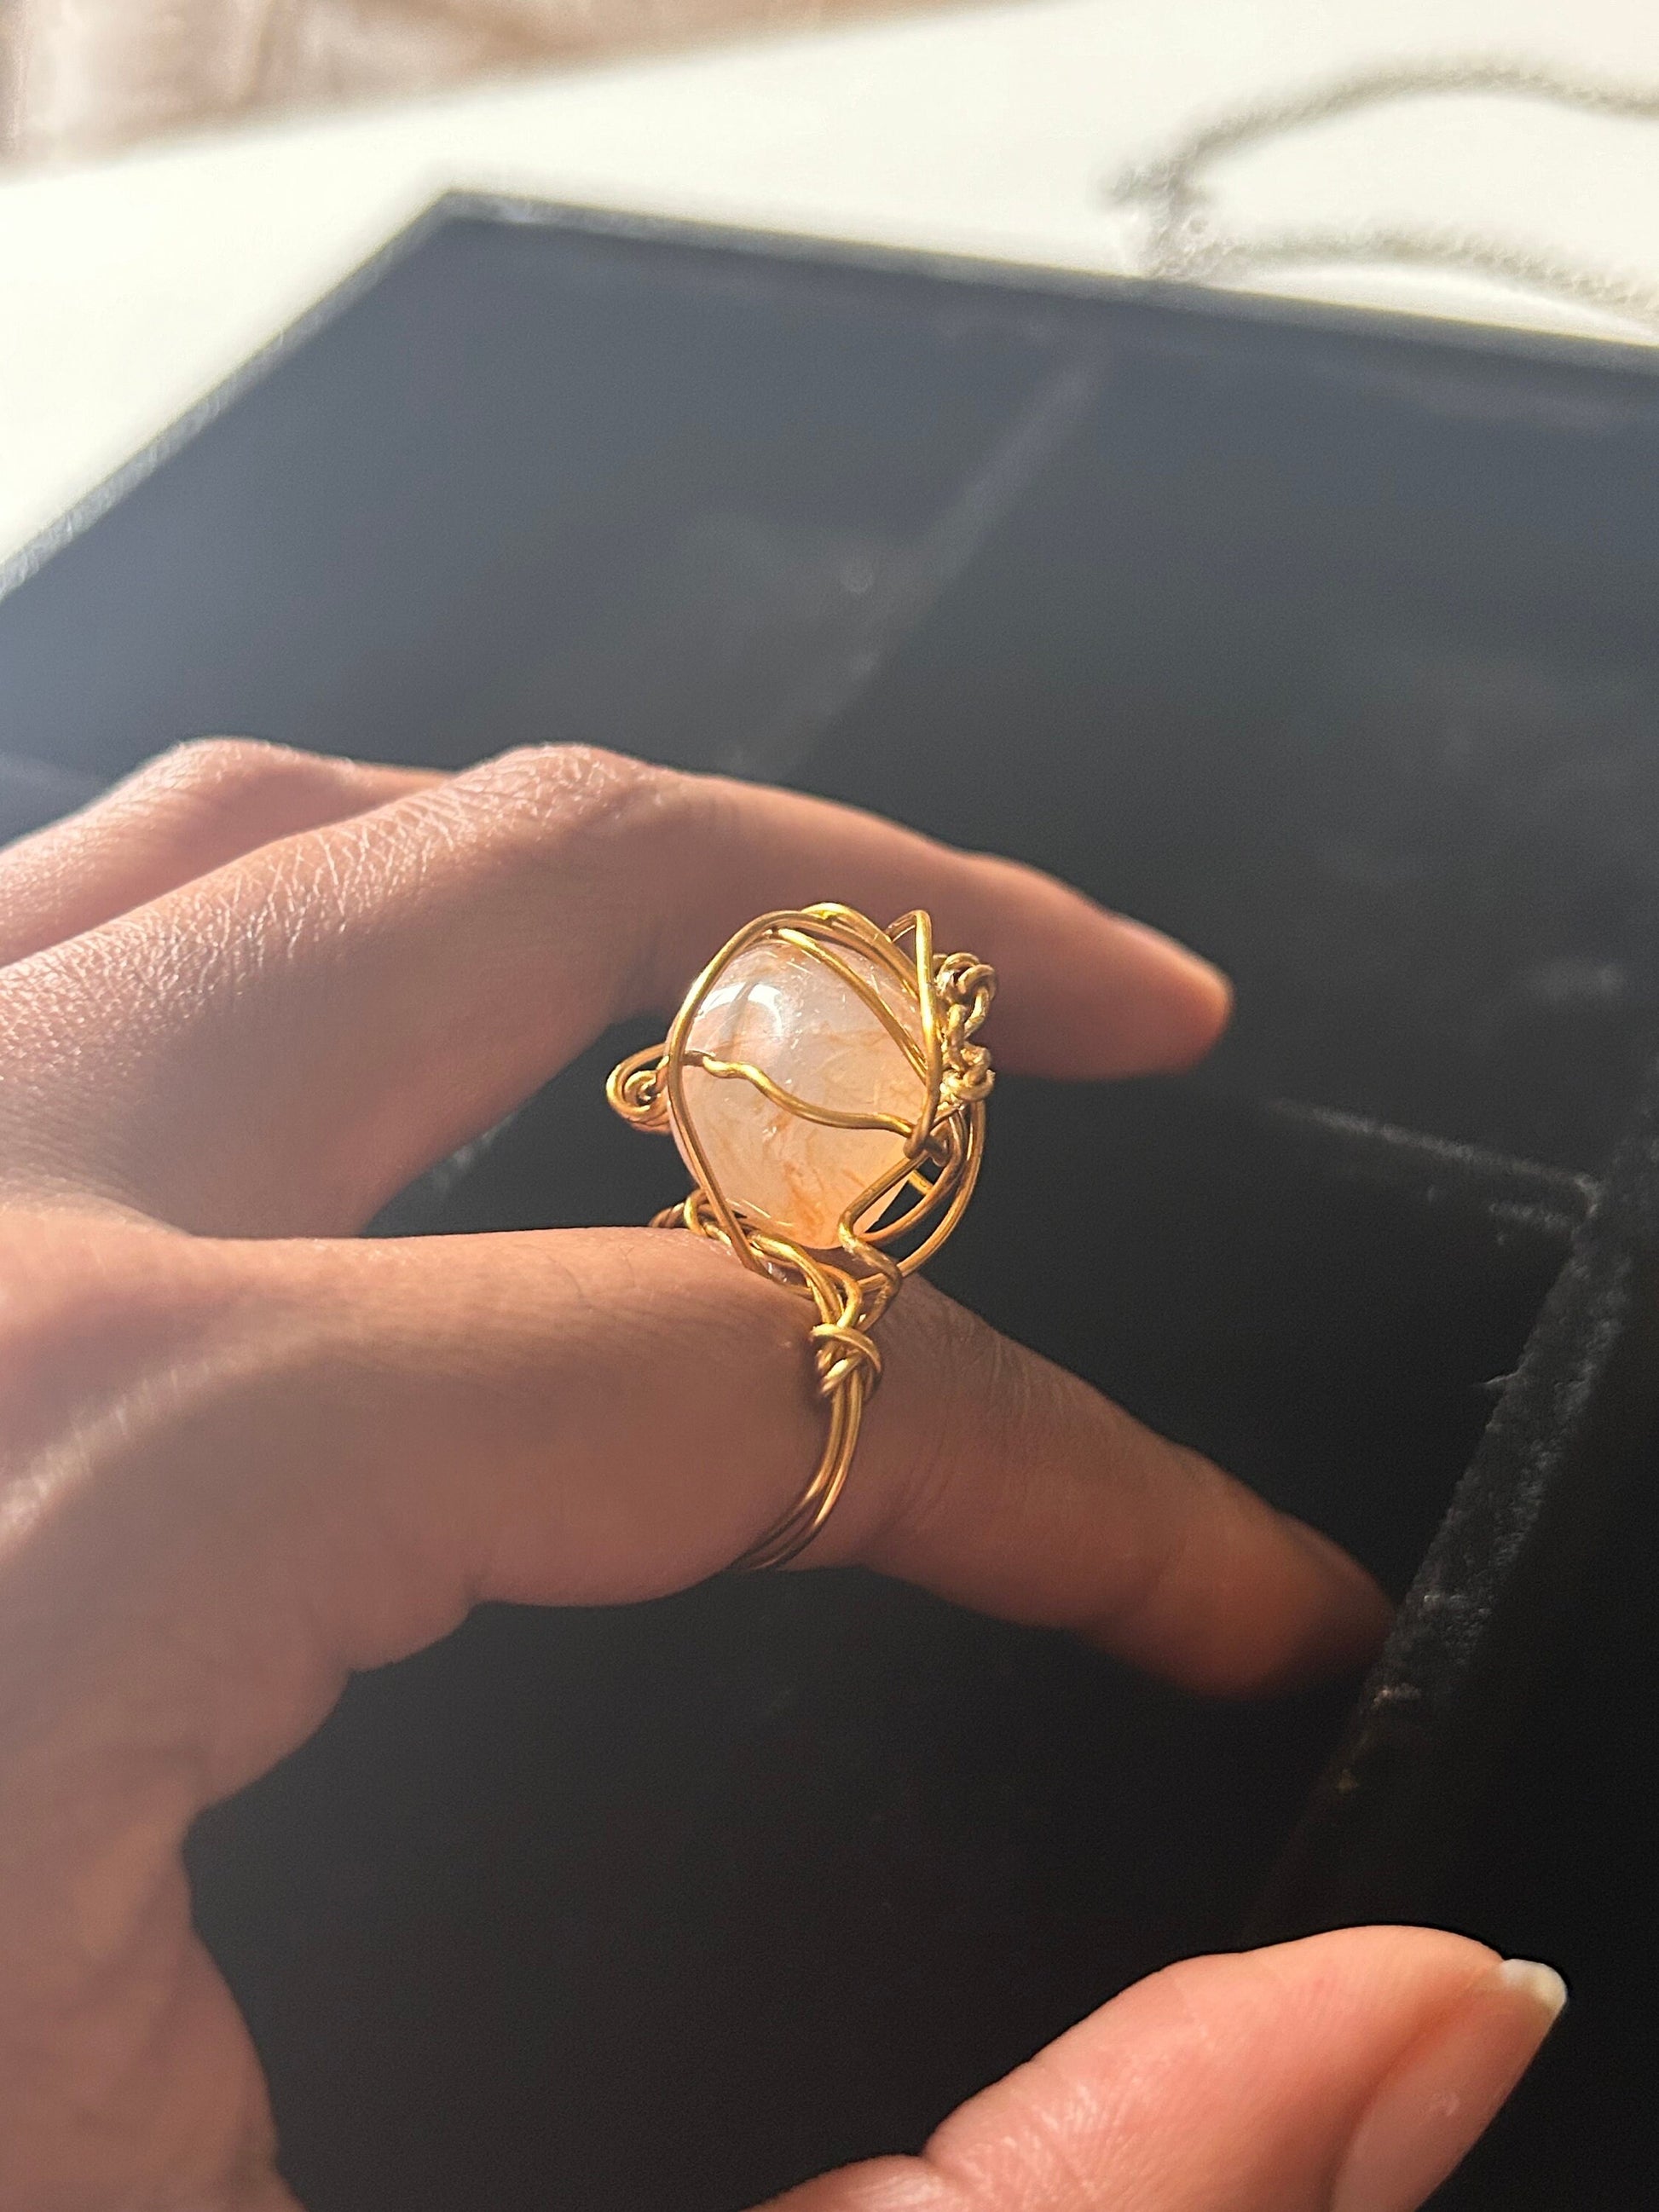 Handmade Wired Wrapped Citrine Pendant Ring